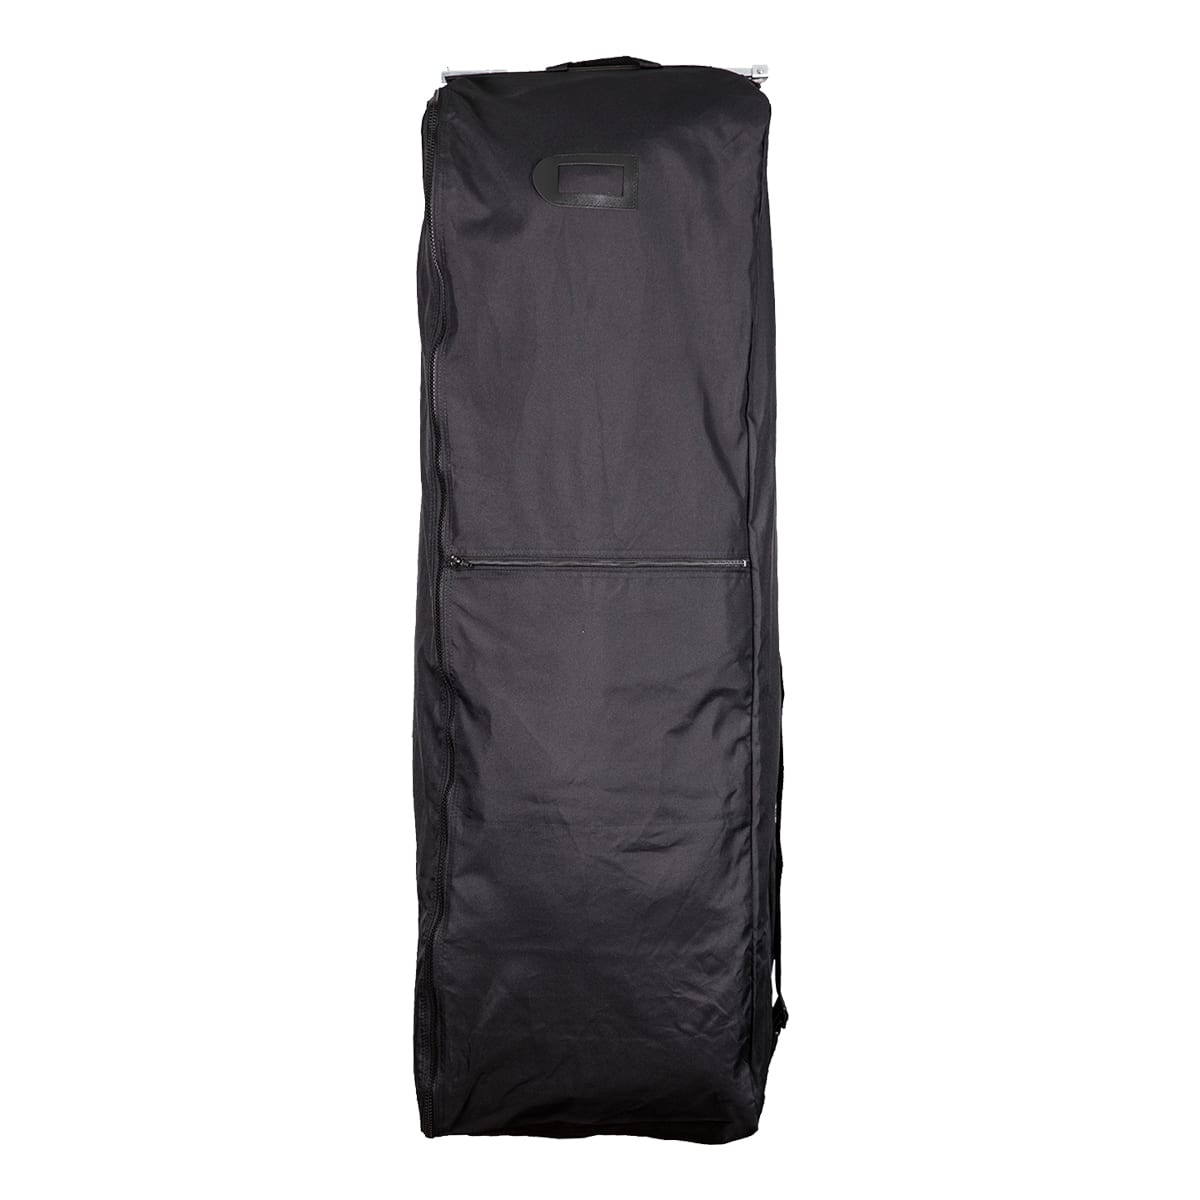  Collection Bag Large (Garment Cover)